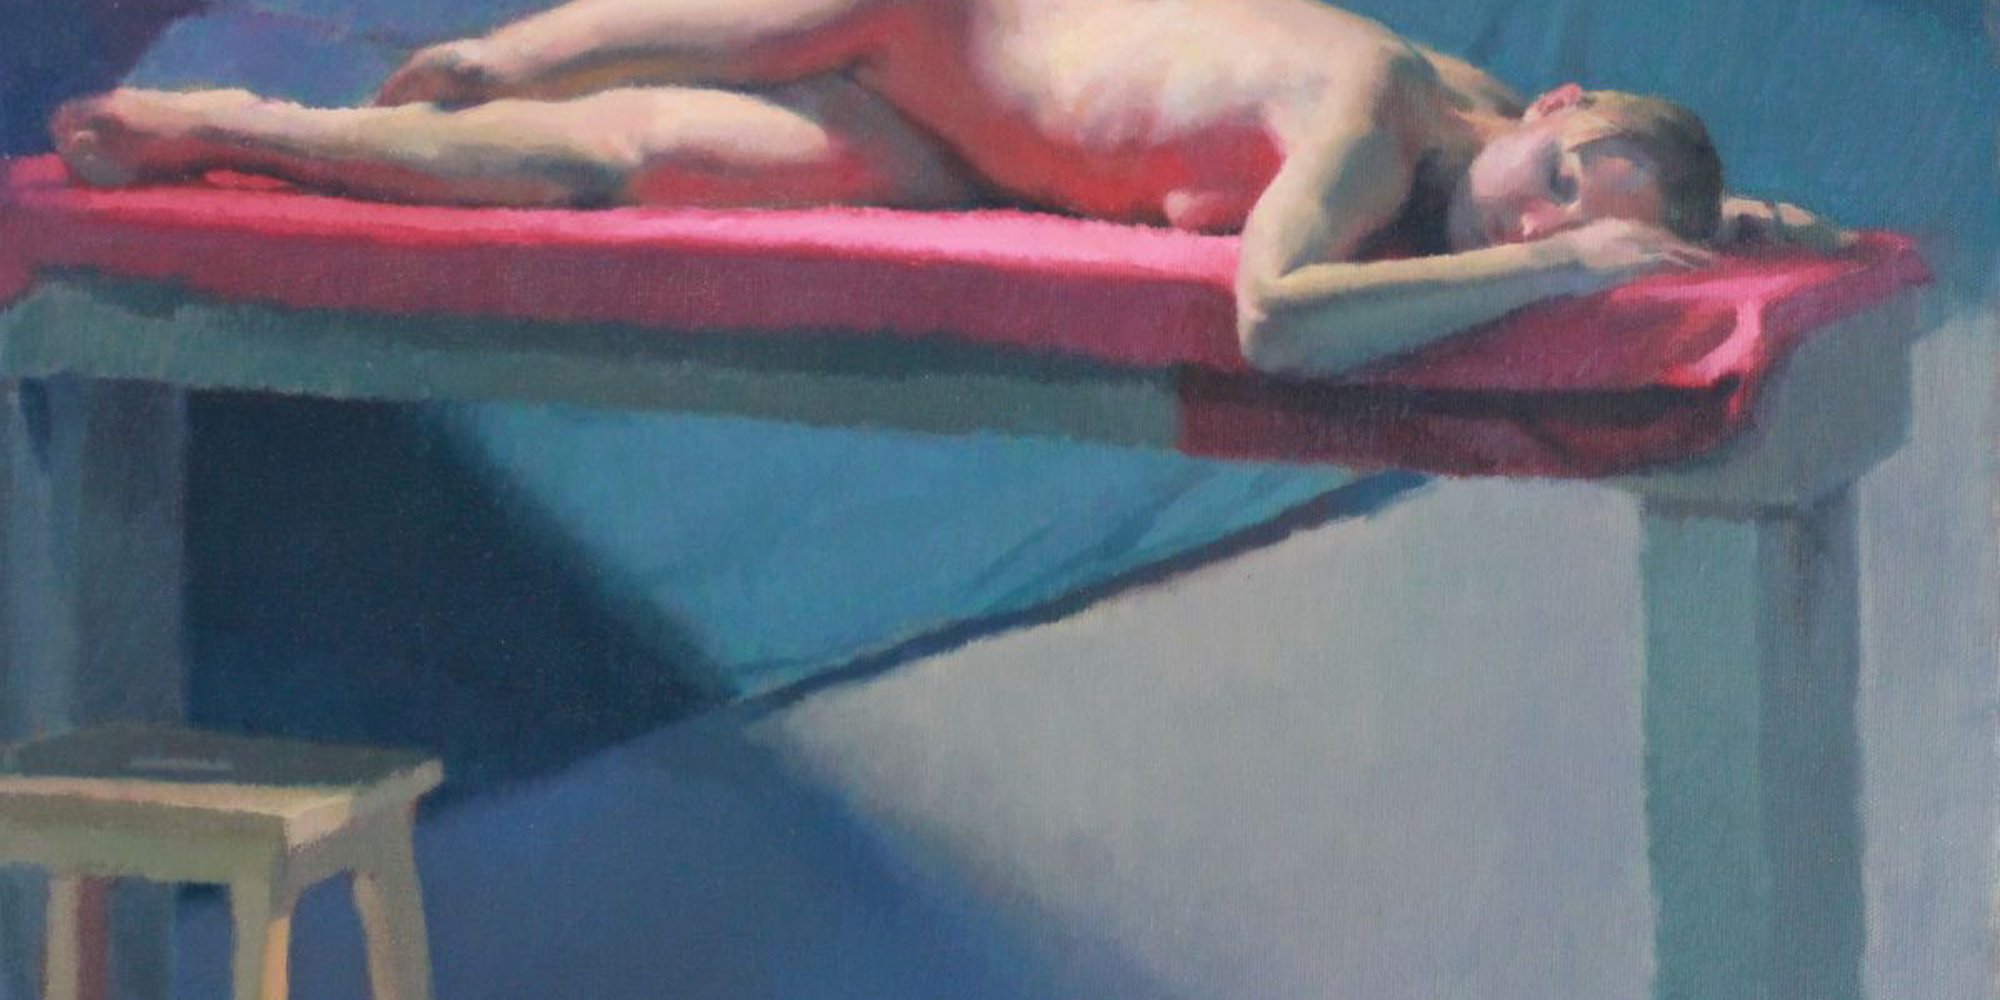 Art of the Day: "Reclining Nude, 2011" by Snehal Page